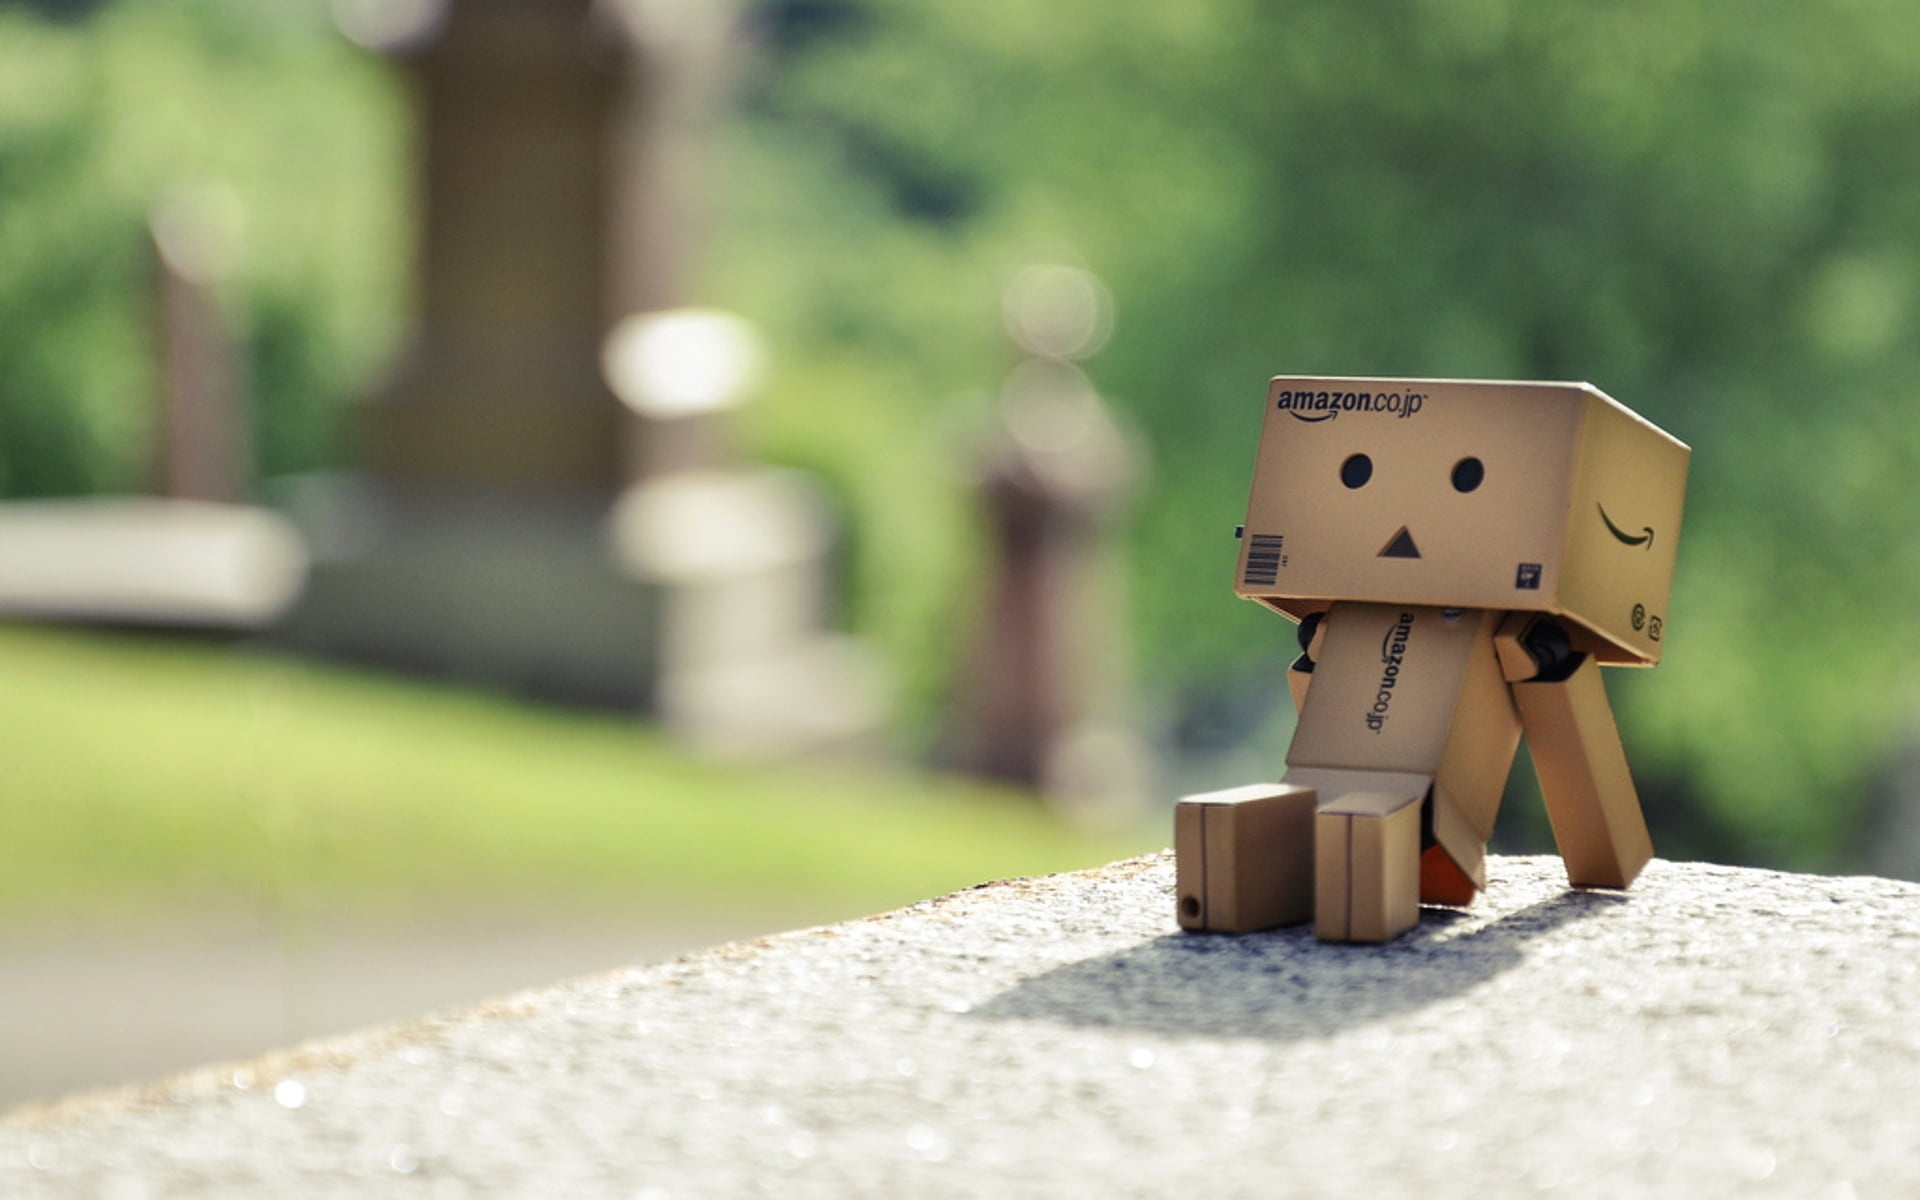 Amazon: The box figure during daytime, Danbo, The largest online retailer. 1920x1200 HD Background.